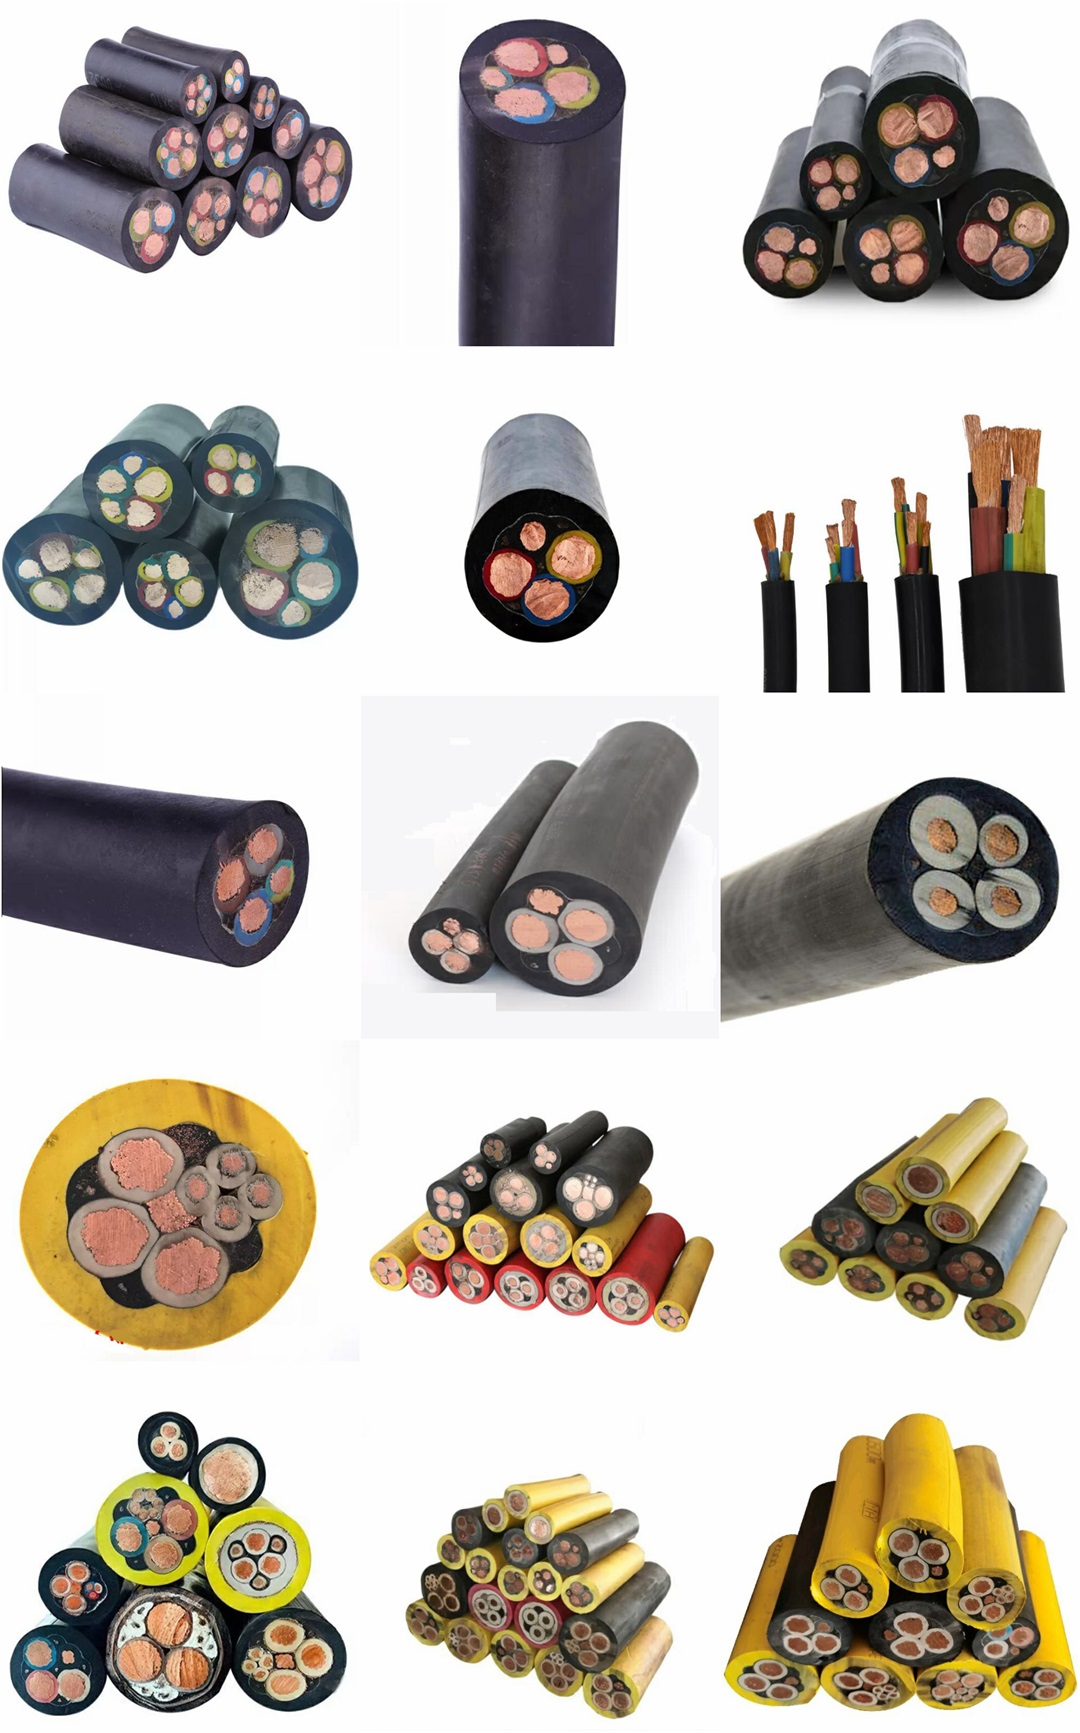 Mobile explosion-proof flame-retardant rubber sheathed flexible copper cable for coal mine